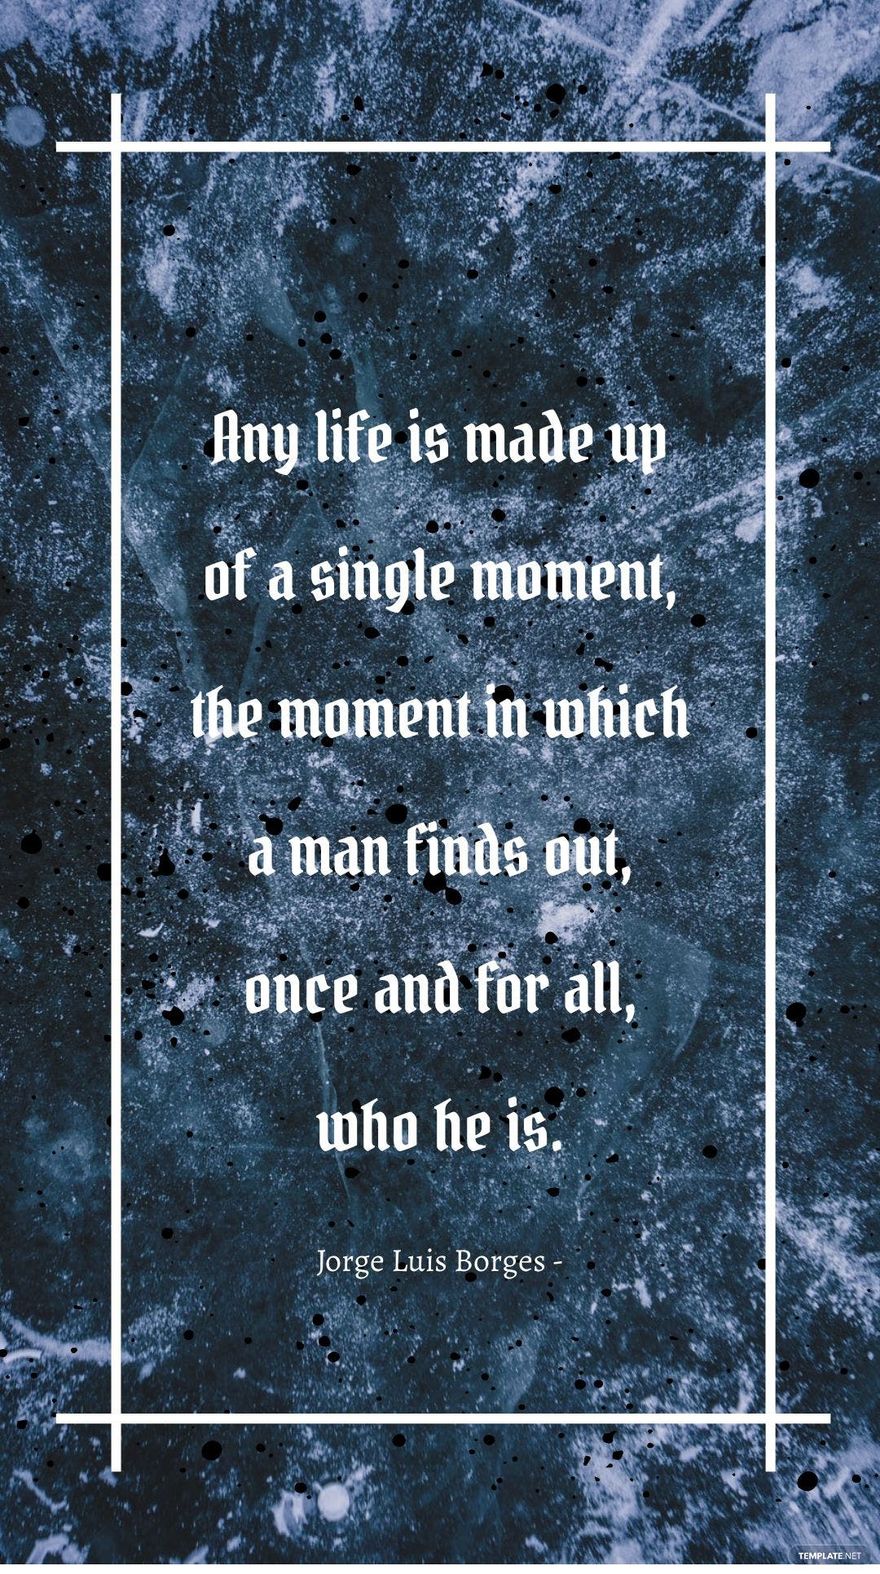 Jorge Luis Borges - Any life is made up of a single moment, the moment in which a man finds out, once and for all, who he is.